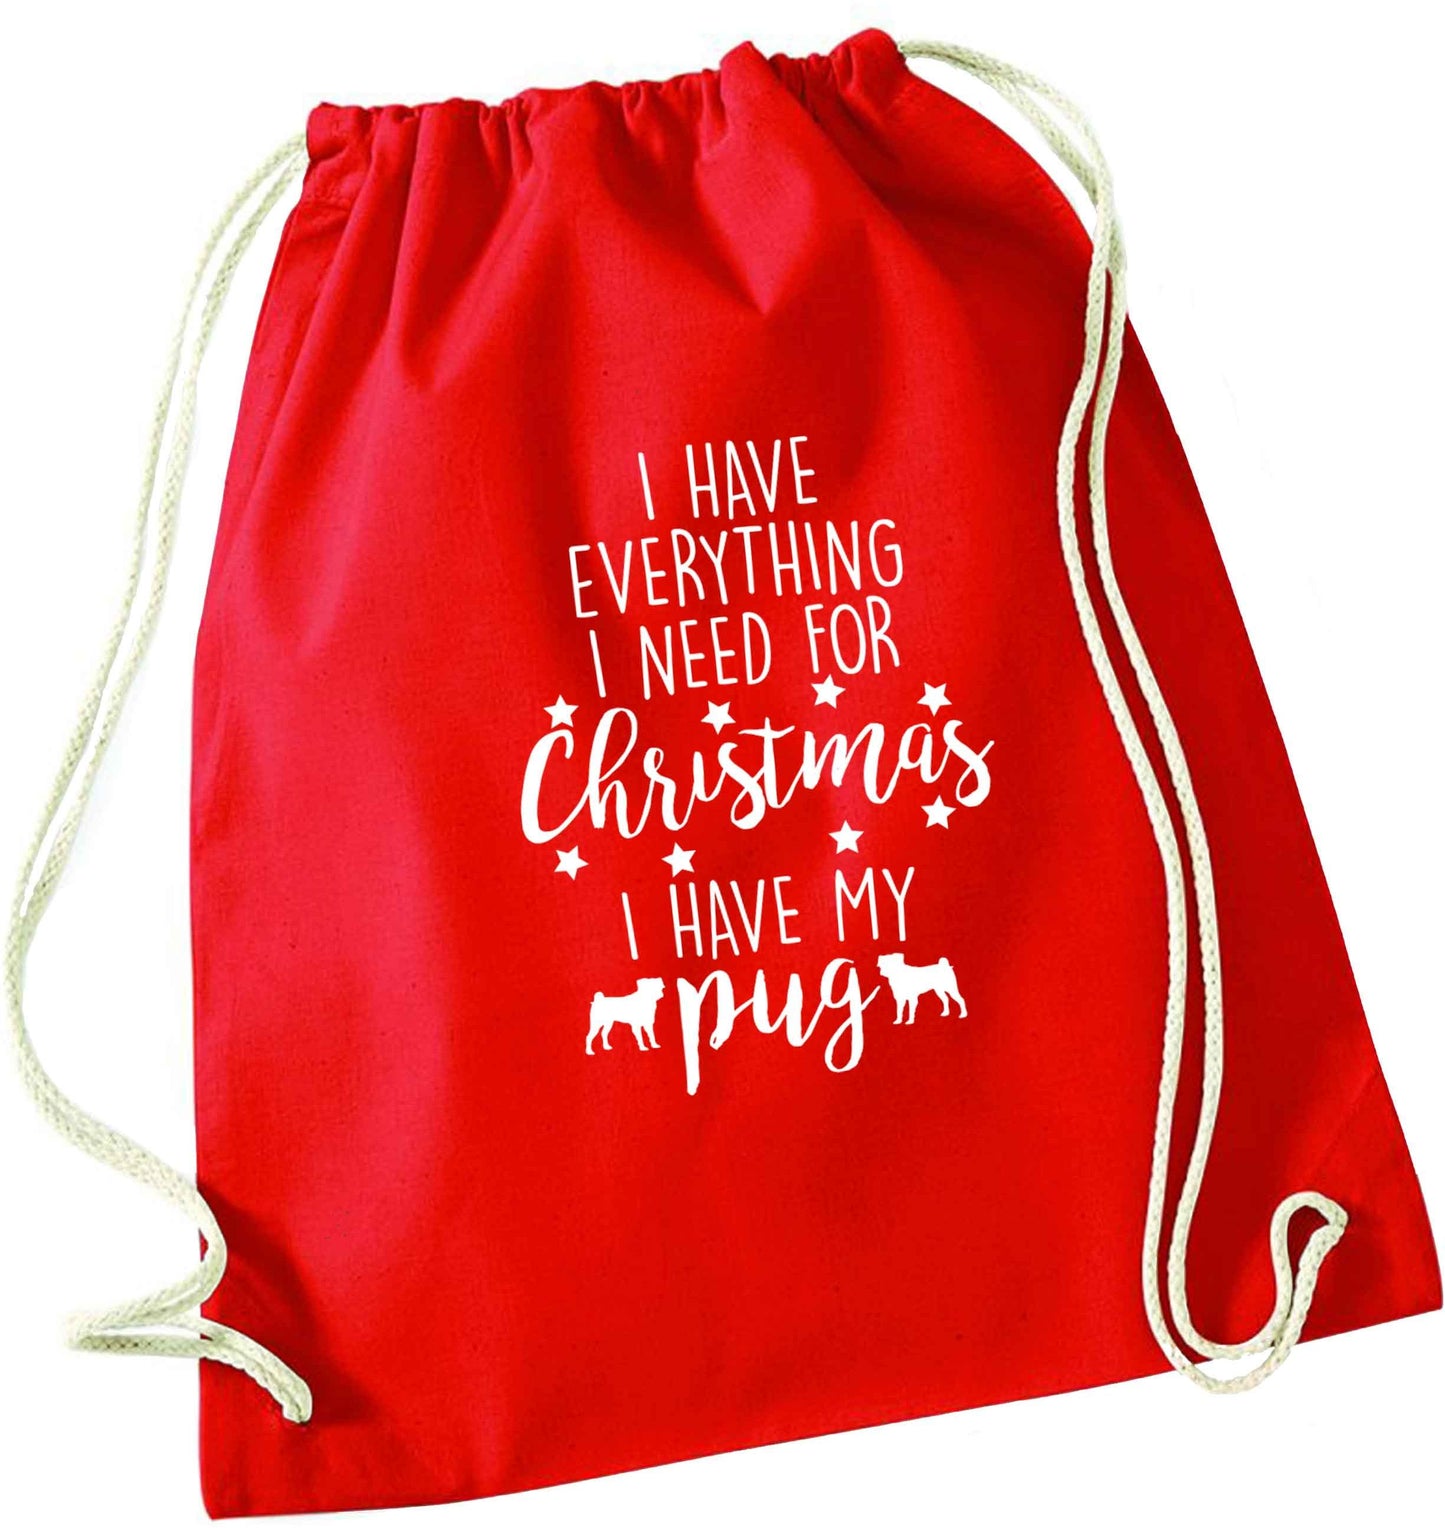 I have everything I need for Christmas I have my pug red drawstring bag 